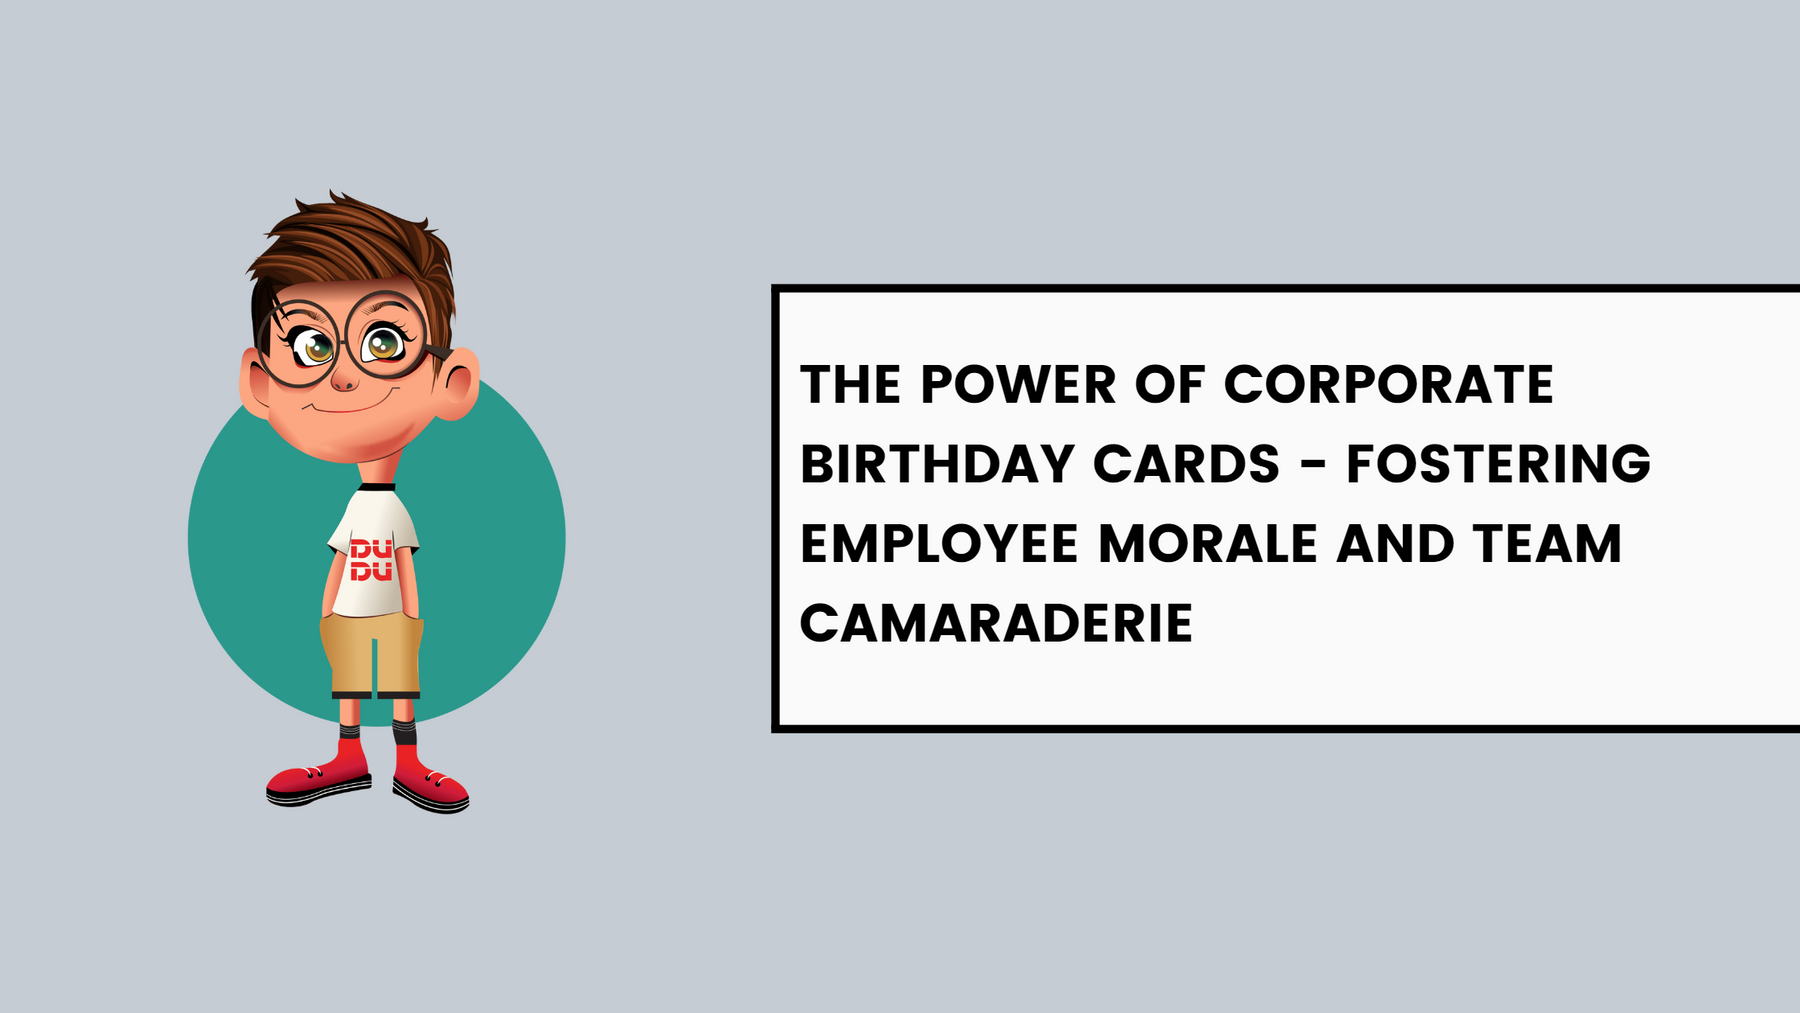 The Power of Corporate Birthday Cards: Fostering Employee Morale and Team Camaraderie